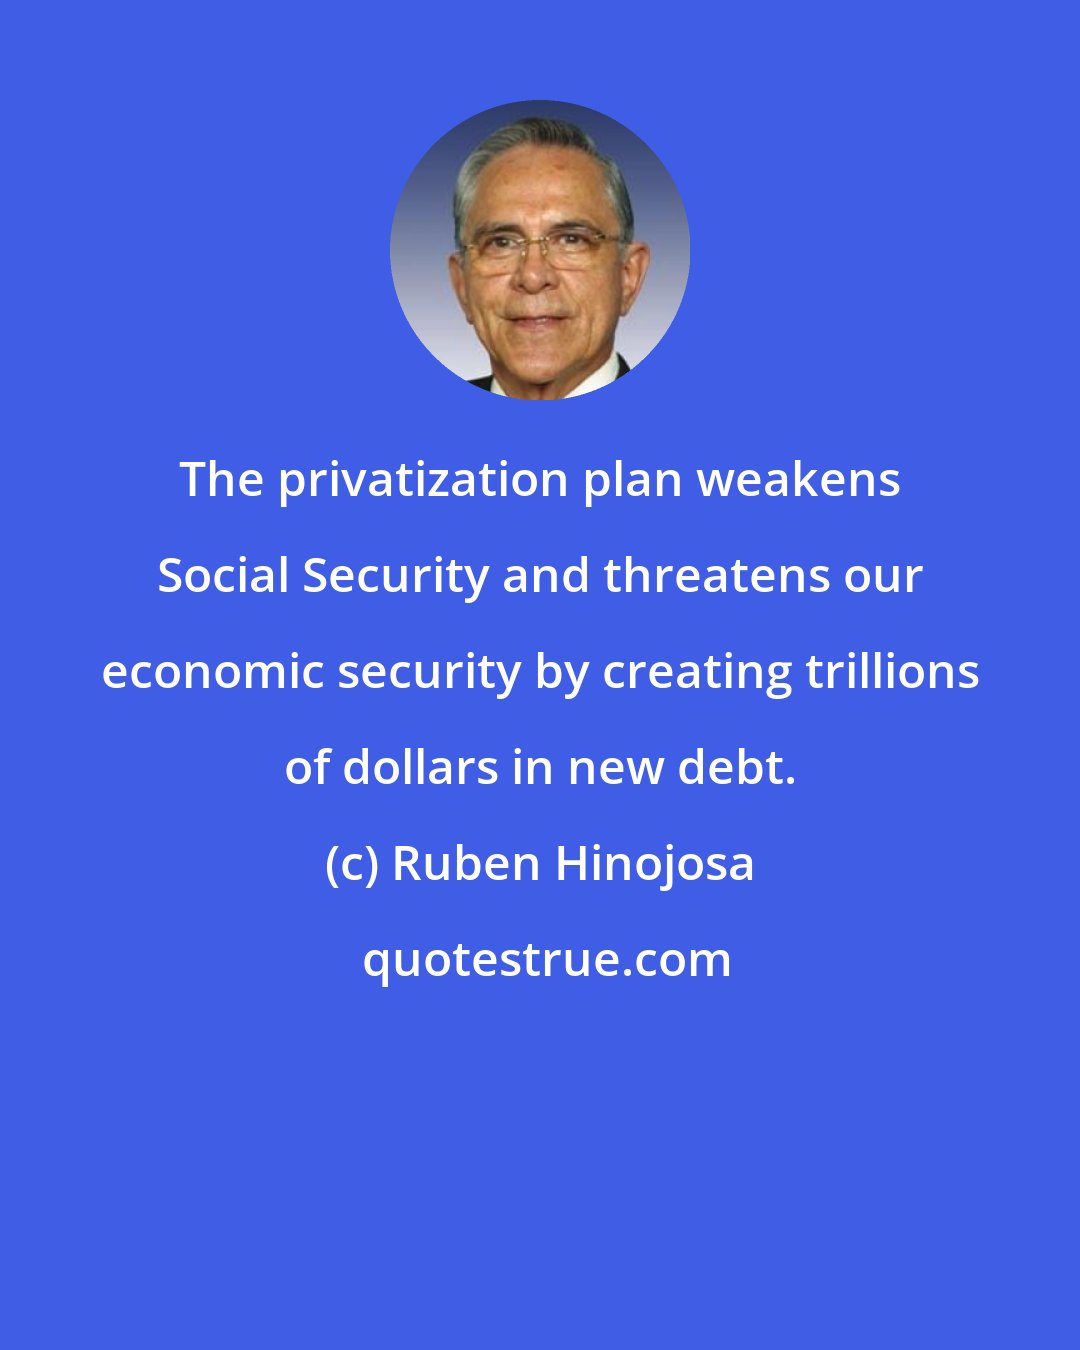 Ruben Hinojosa: The privatization plan weakens Social Security and threatens our economic security by creating trillions of dollars in new debt.